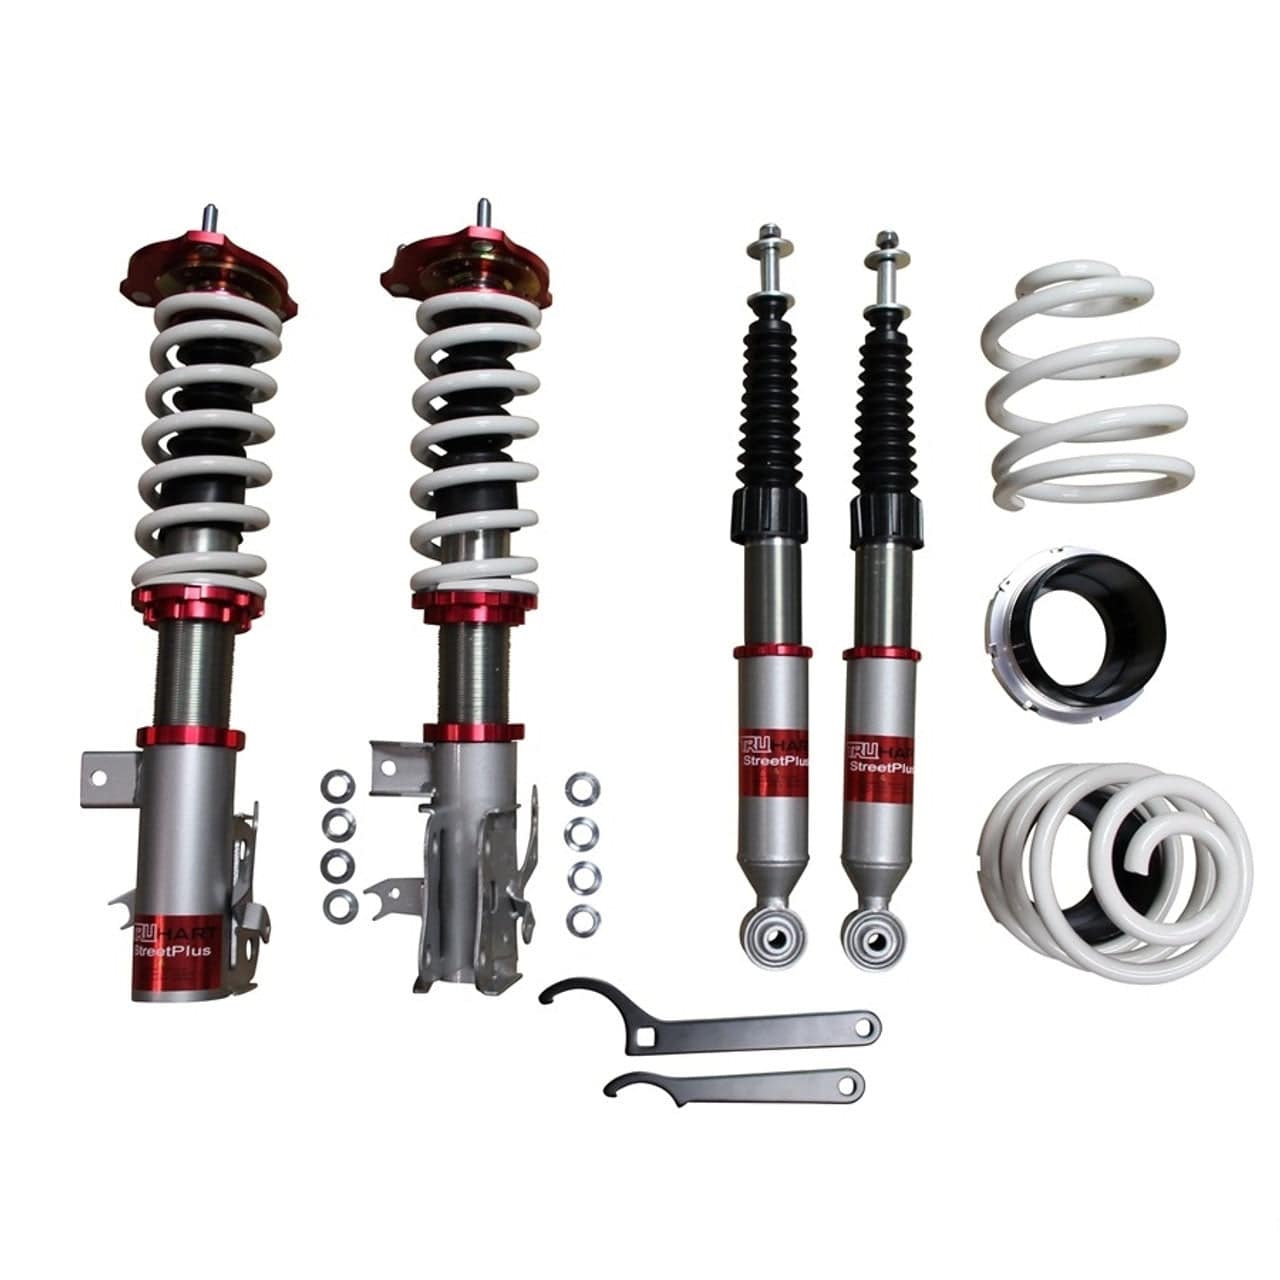 TruHart StreetPlus Coilovers for 2012-2015 Honda Civic TH-H805-1